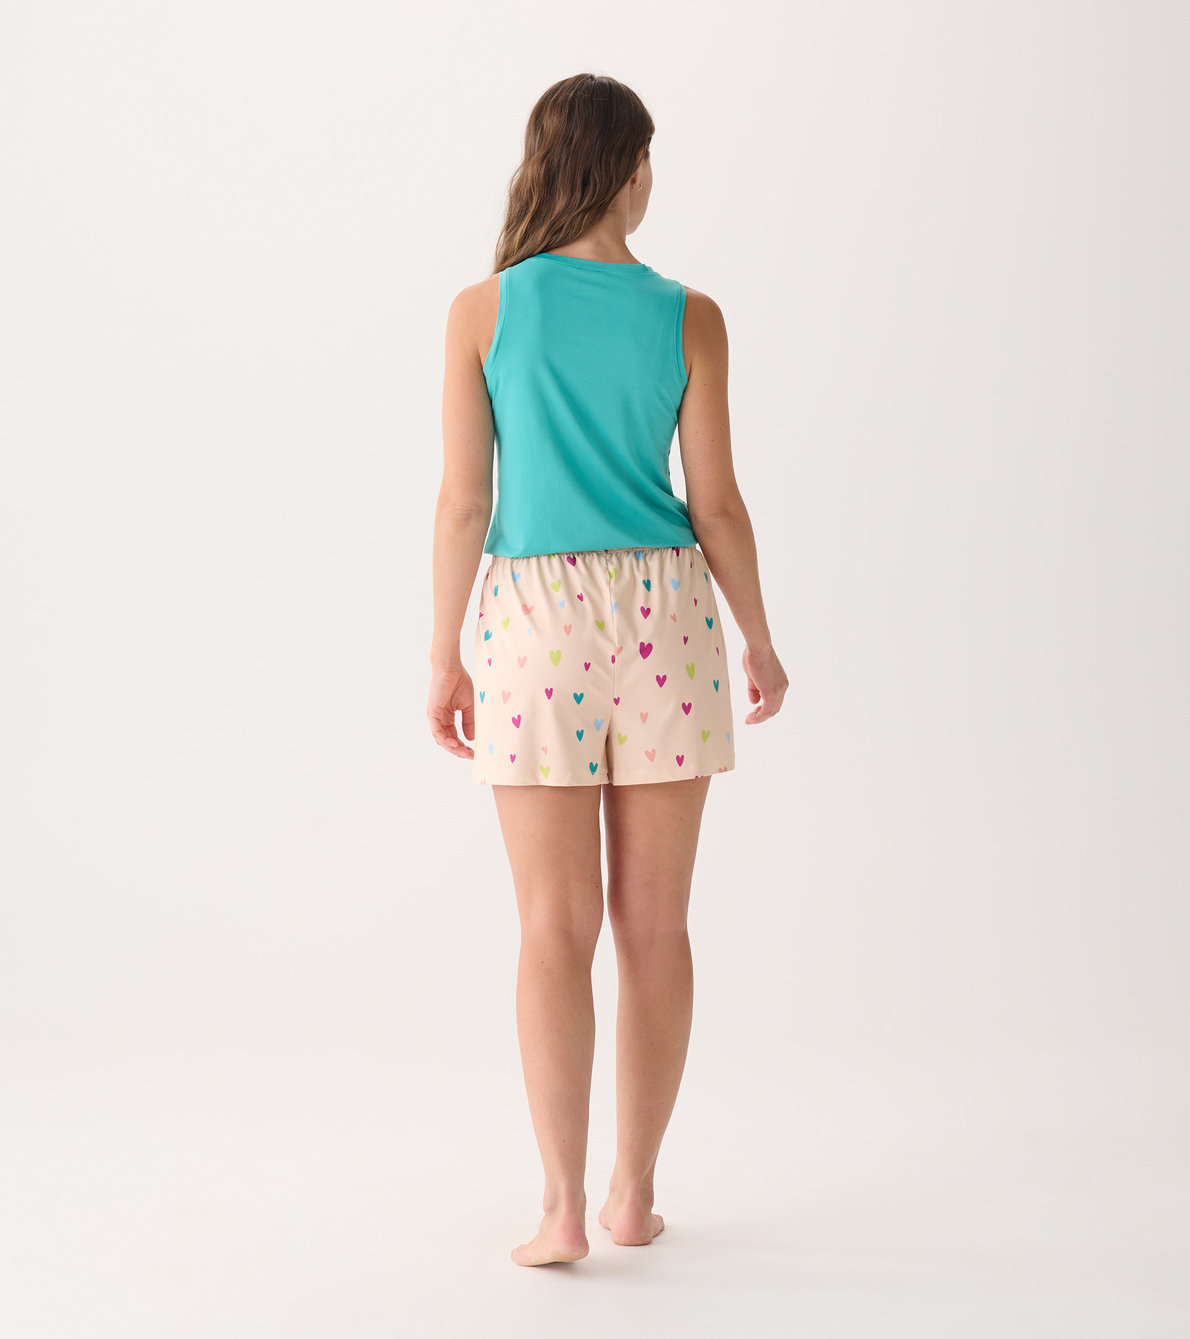 View larger image of Capelton Road Women's Jelly Bean Hearts Pajama Shorts